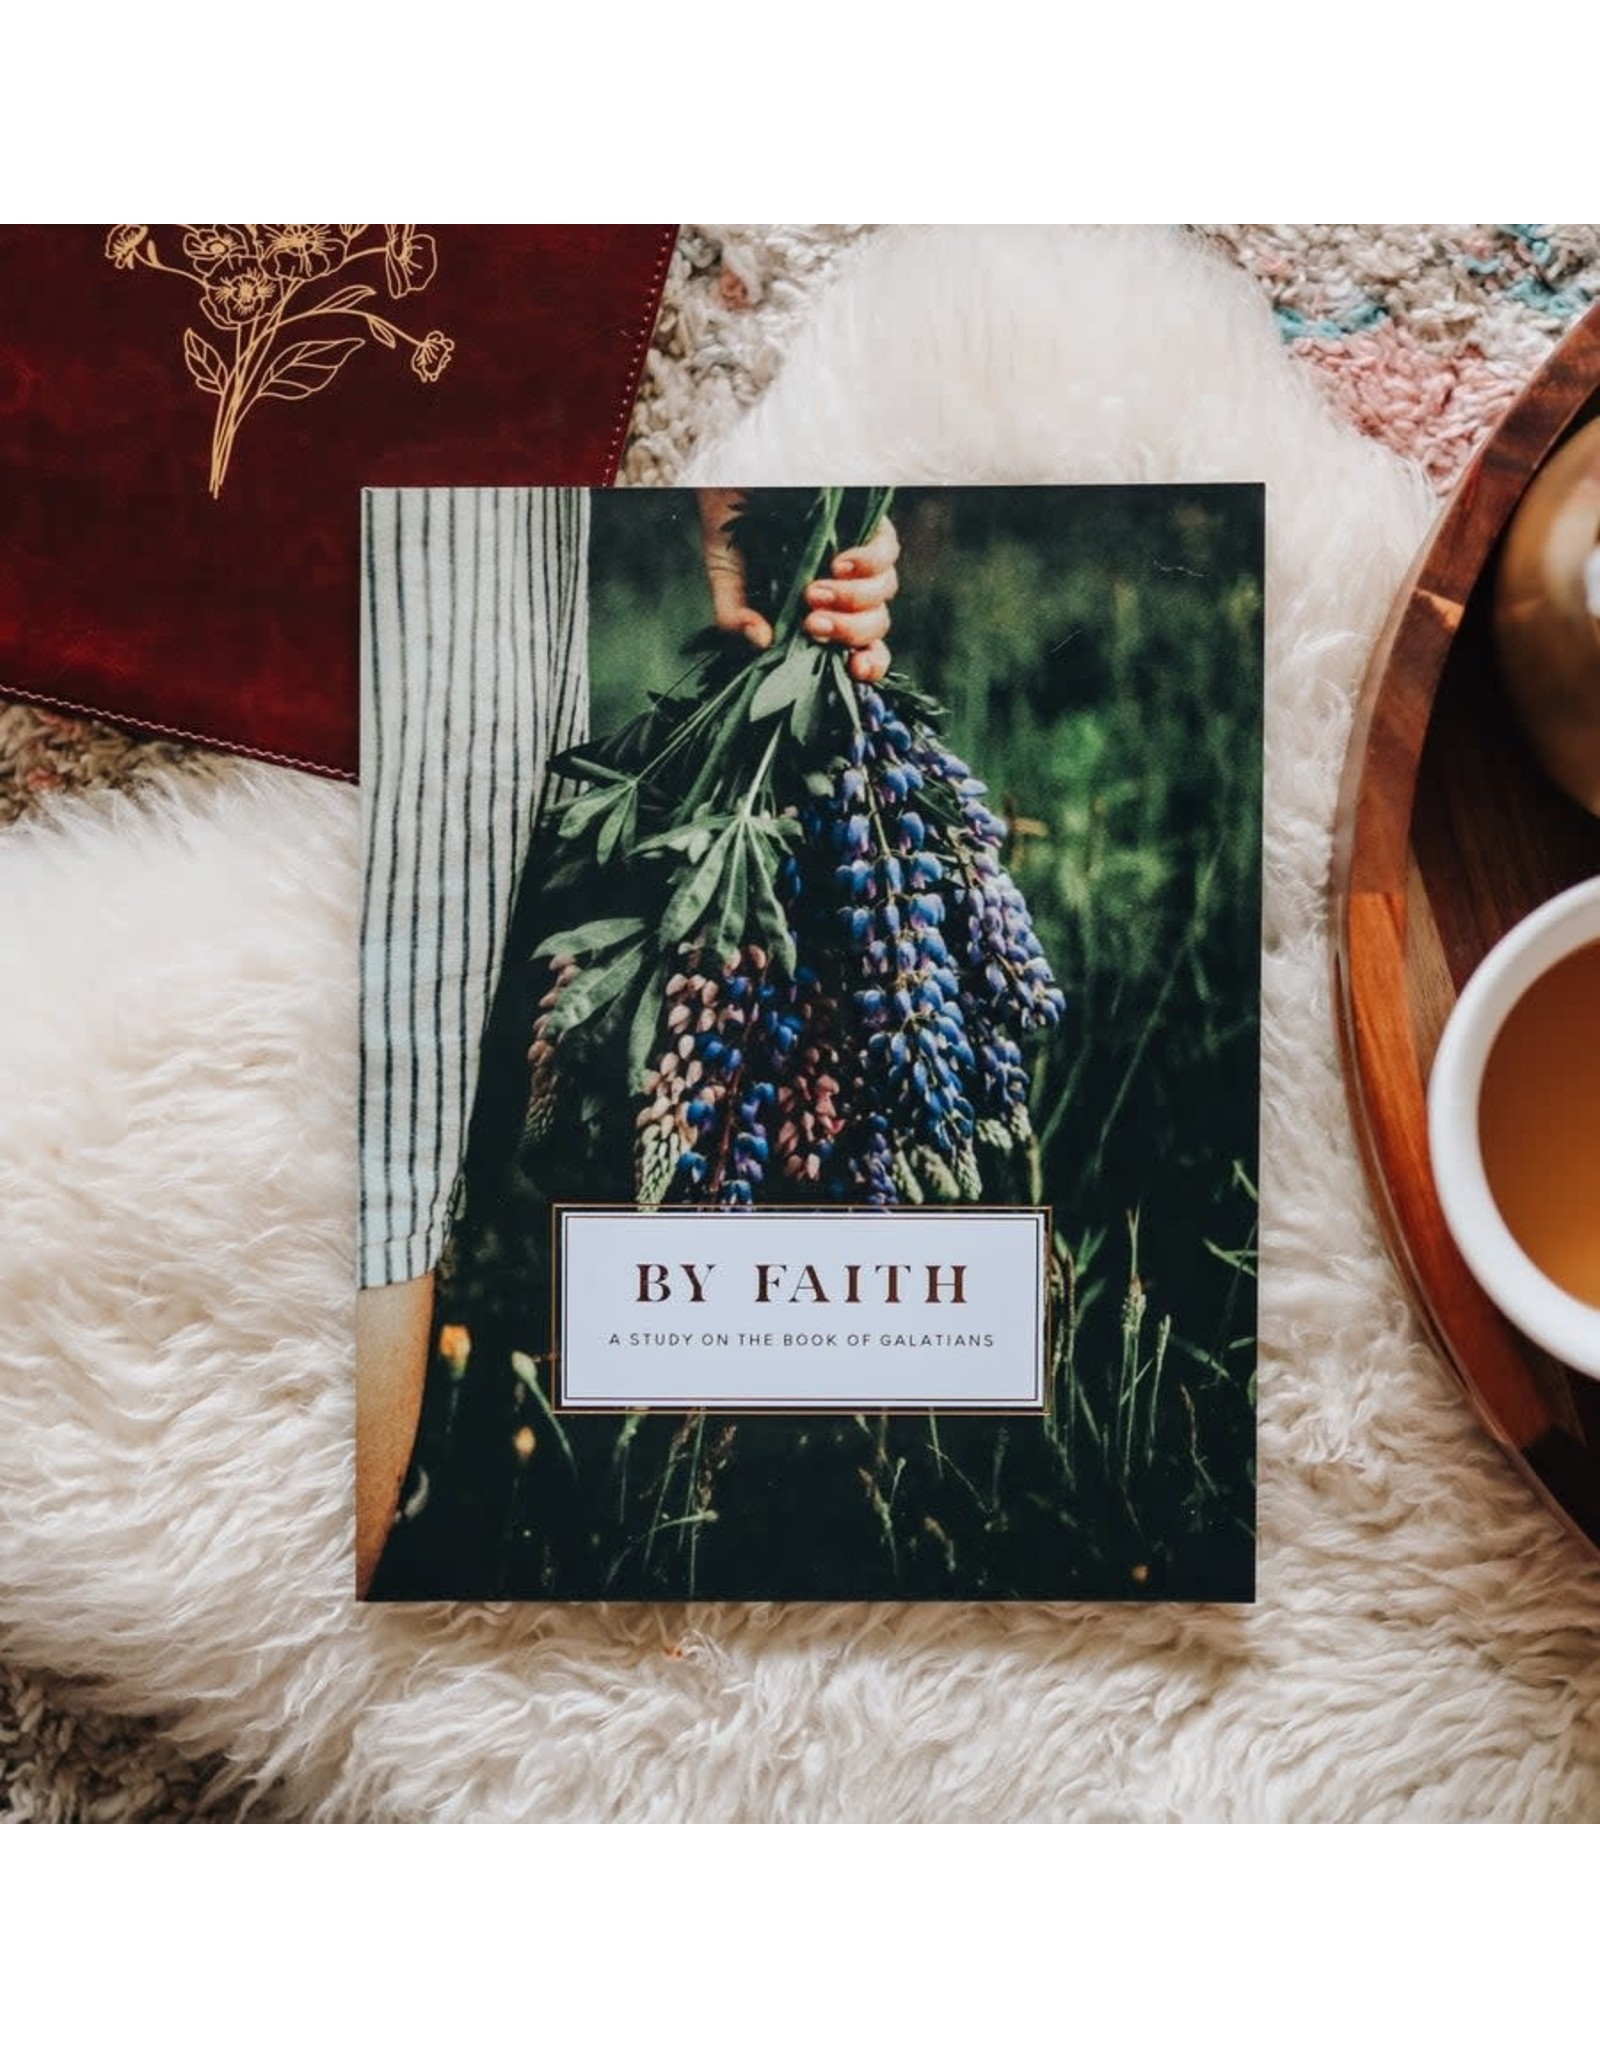 Book of Galatians "By Faith" Study for Women